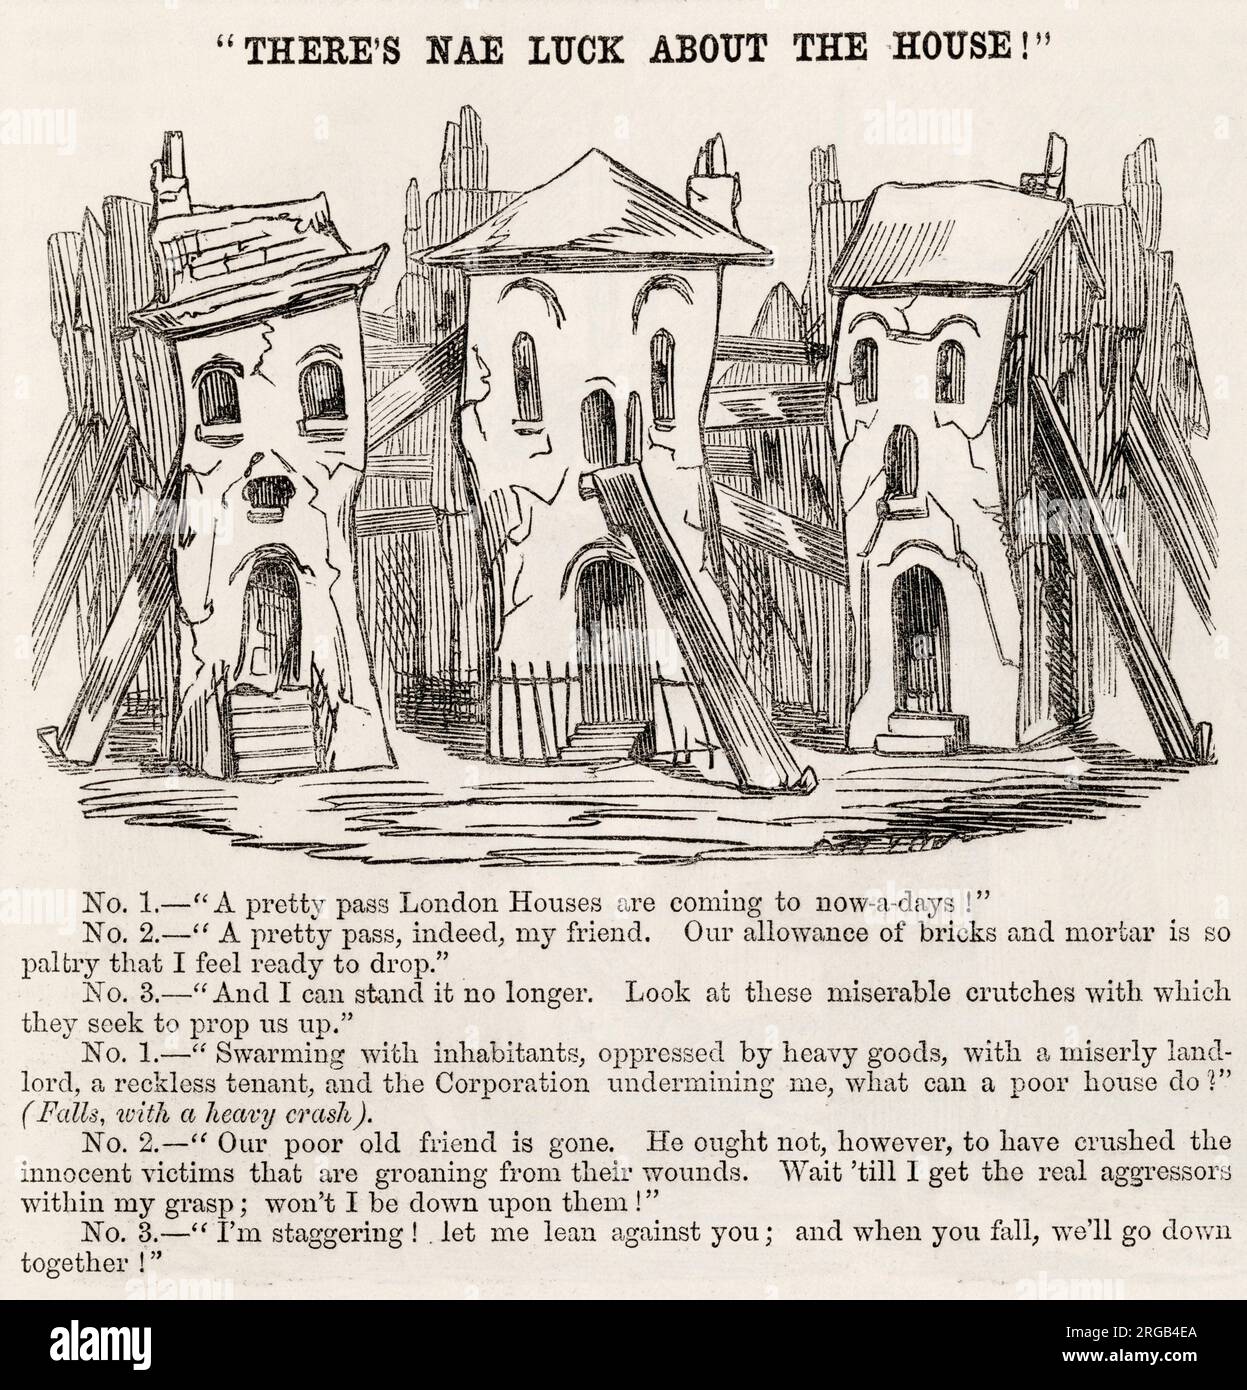 There's nae luck about the house! Cartoon and comment about house-building in London in the 1850s. The houses are falling down, propped up by 'miserable crutches', their 'allowance of bricks and mortar so paltry' they are ready to drop. 'Swarming with inhabitants, oppressed by heavy goods, with a miserly landlord, a reckless tenant, and the Corporation undermining me, what can a poor house do?' Stock Photo